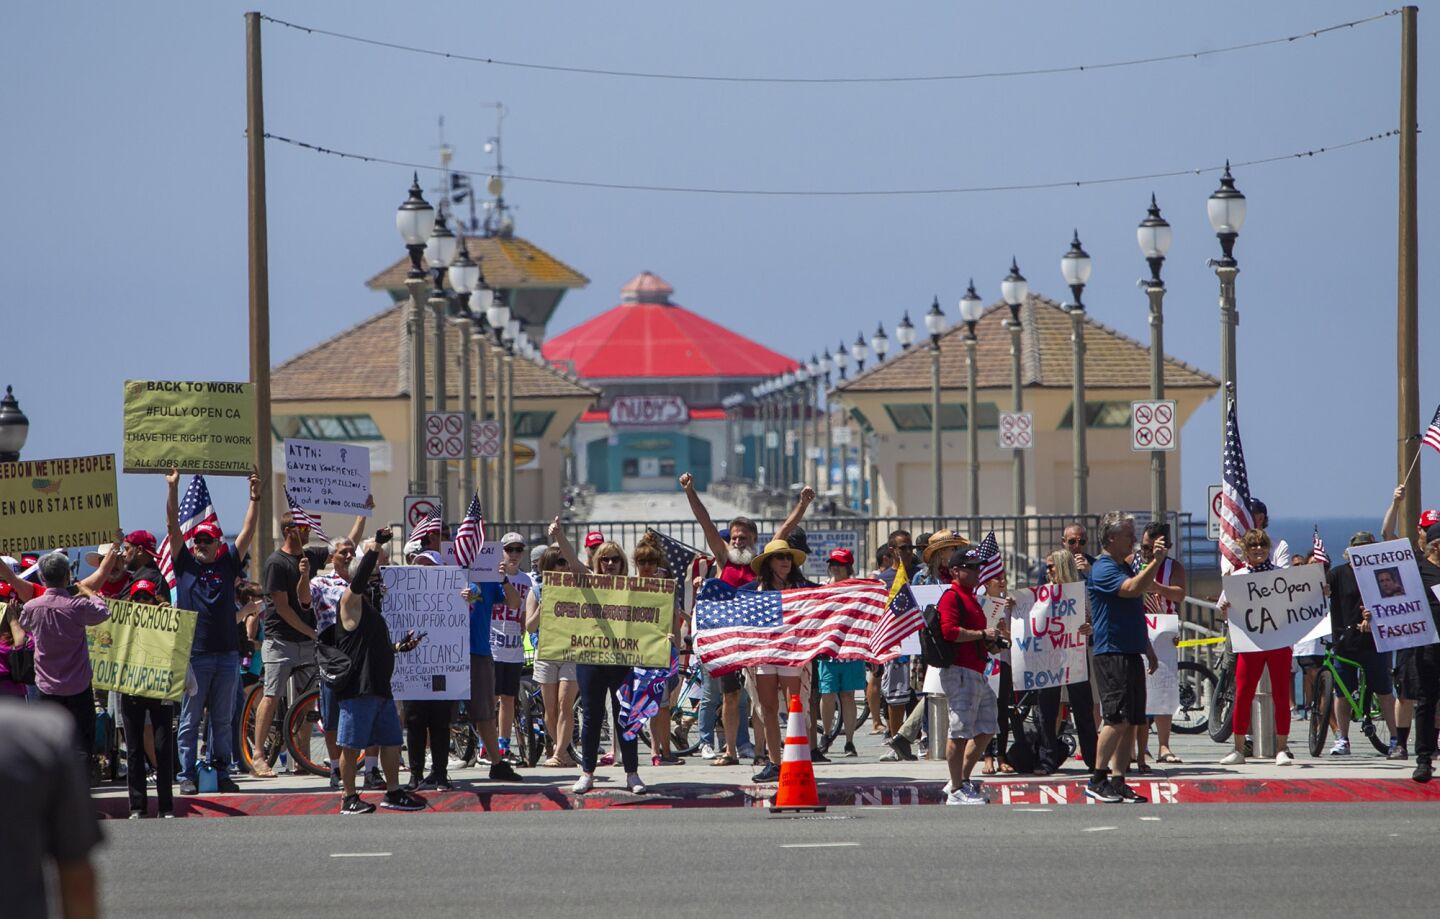 A large crowd gathers during a protest near the Huntington Beach Pier on Friday.